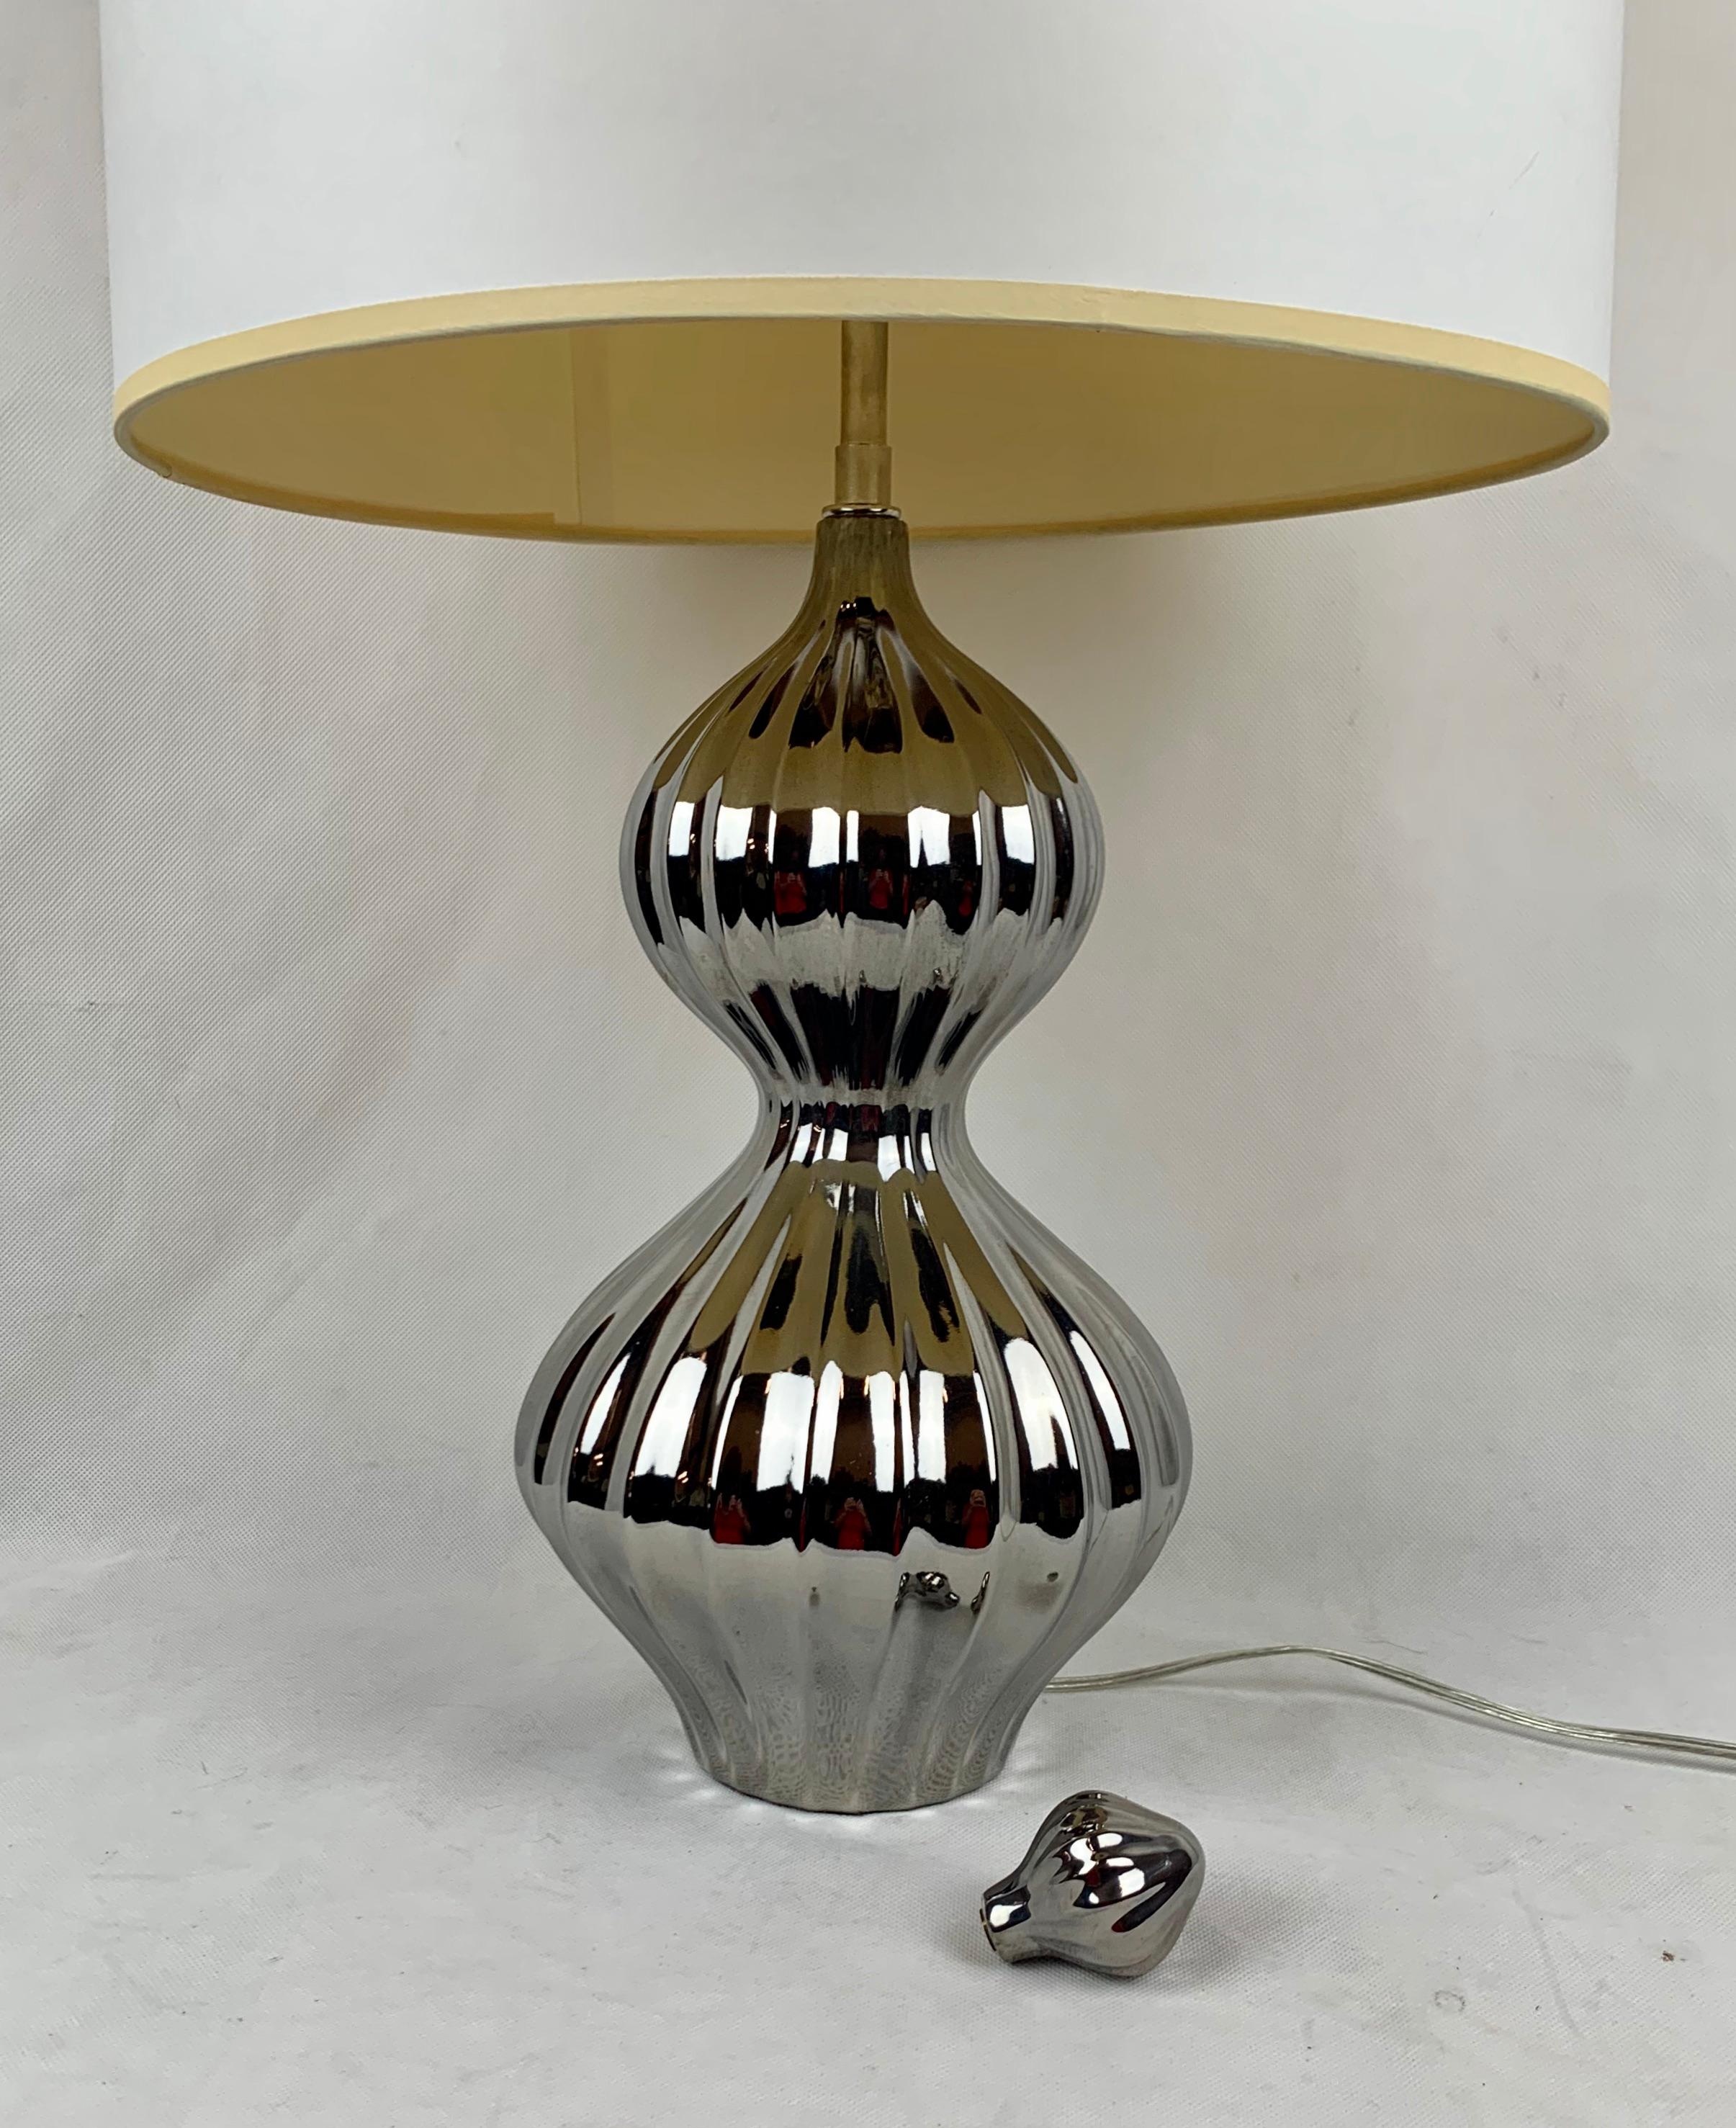 Vintage Jonathan Adler's platinum nelson lamp c. 2010. The lamp is high fired stoneware with a platinum glaze. The double gourd body is ribbed and has a matching platinum glazed finial. The lampshade is white.
Measures: Height to